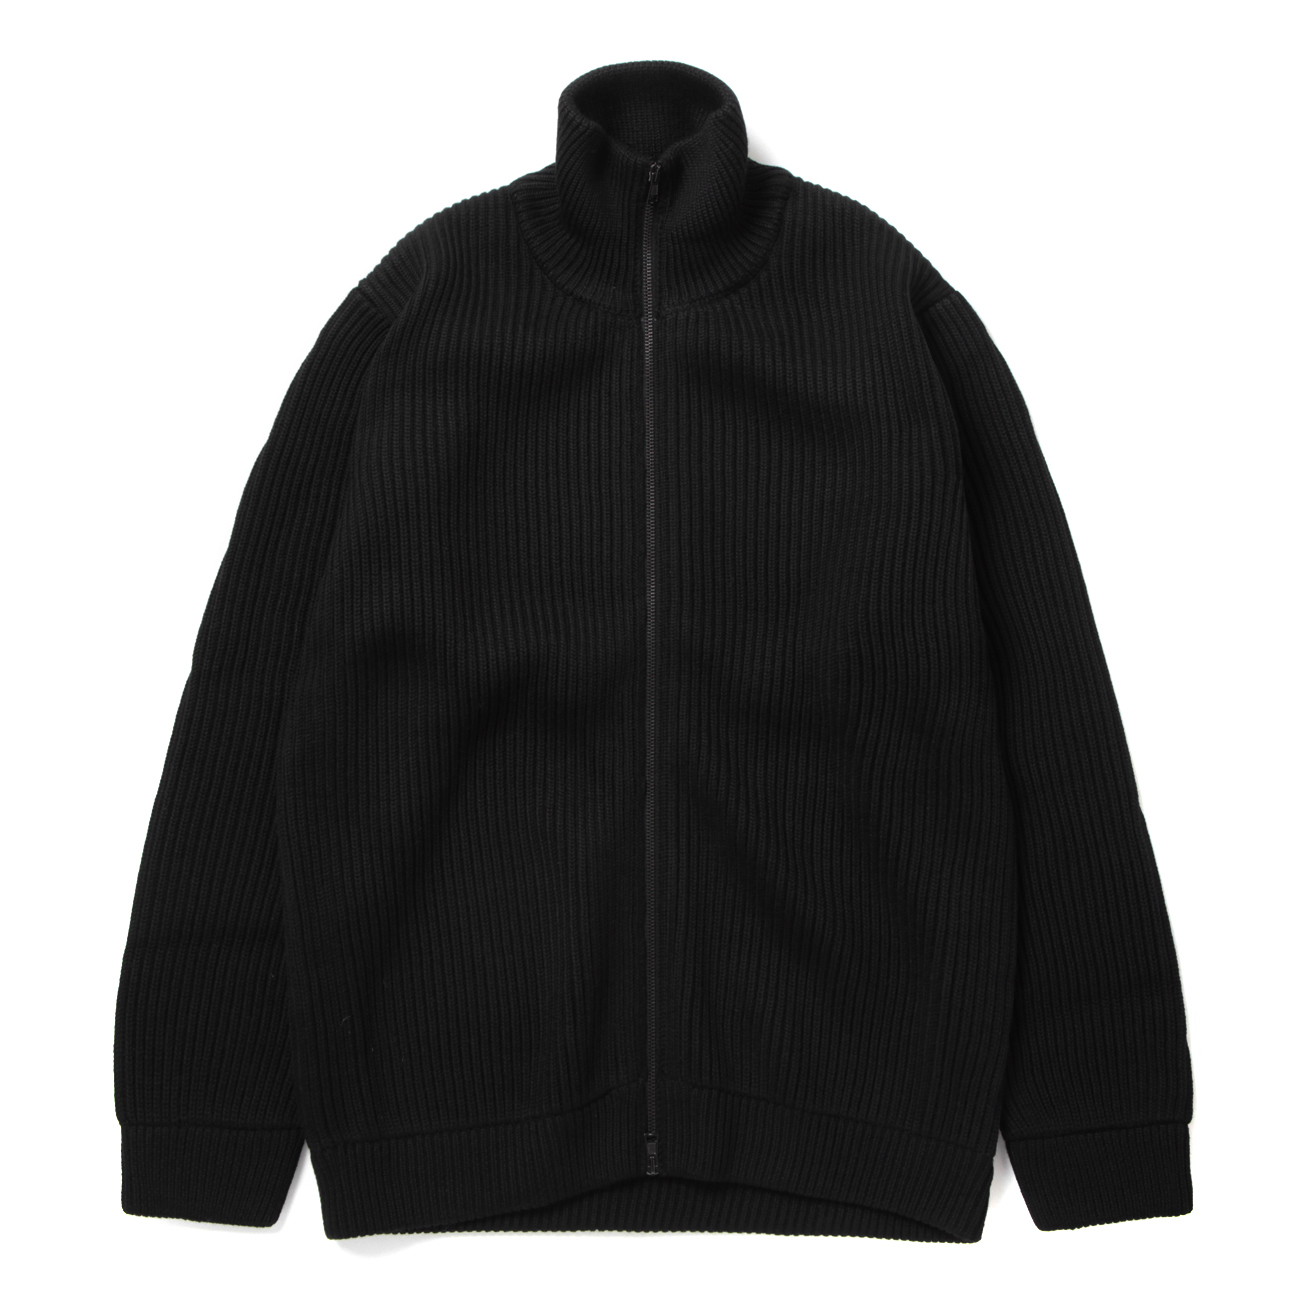 LIMITED HAND FRAMED DRIVERS ZIP KNIT - Black